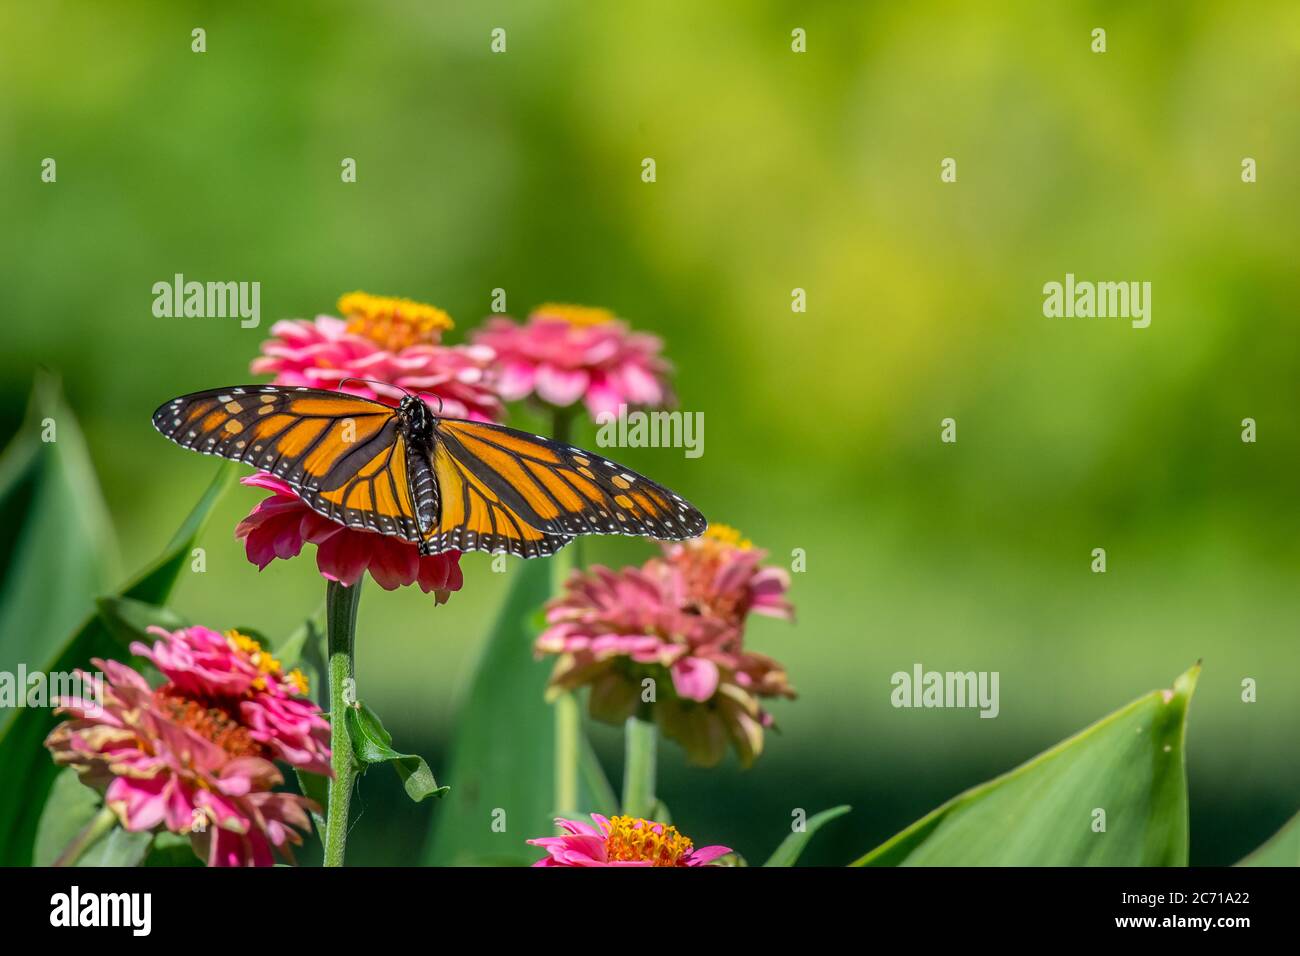 Closeup macro of a beautiful bright orange and black monarch butterfly feeding on a patch of brilliant pink zinnia flower blooms in a garden. Stock Photo